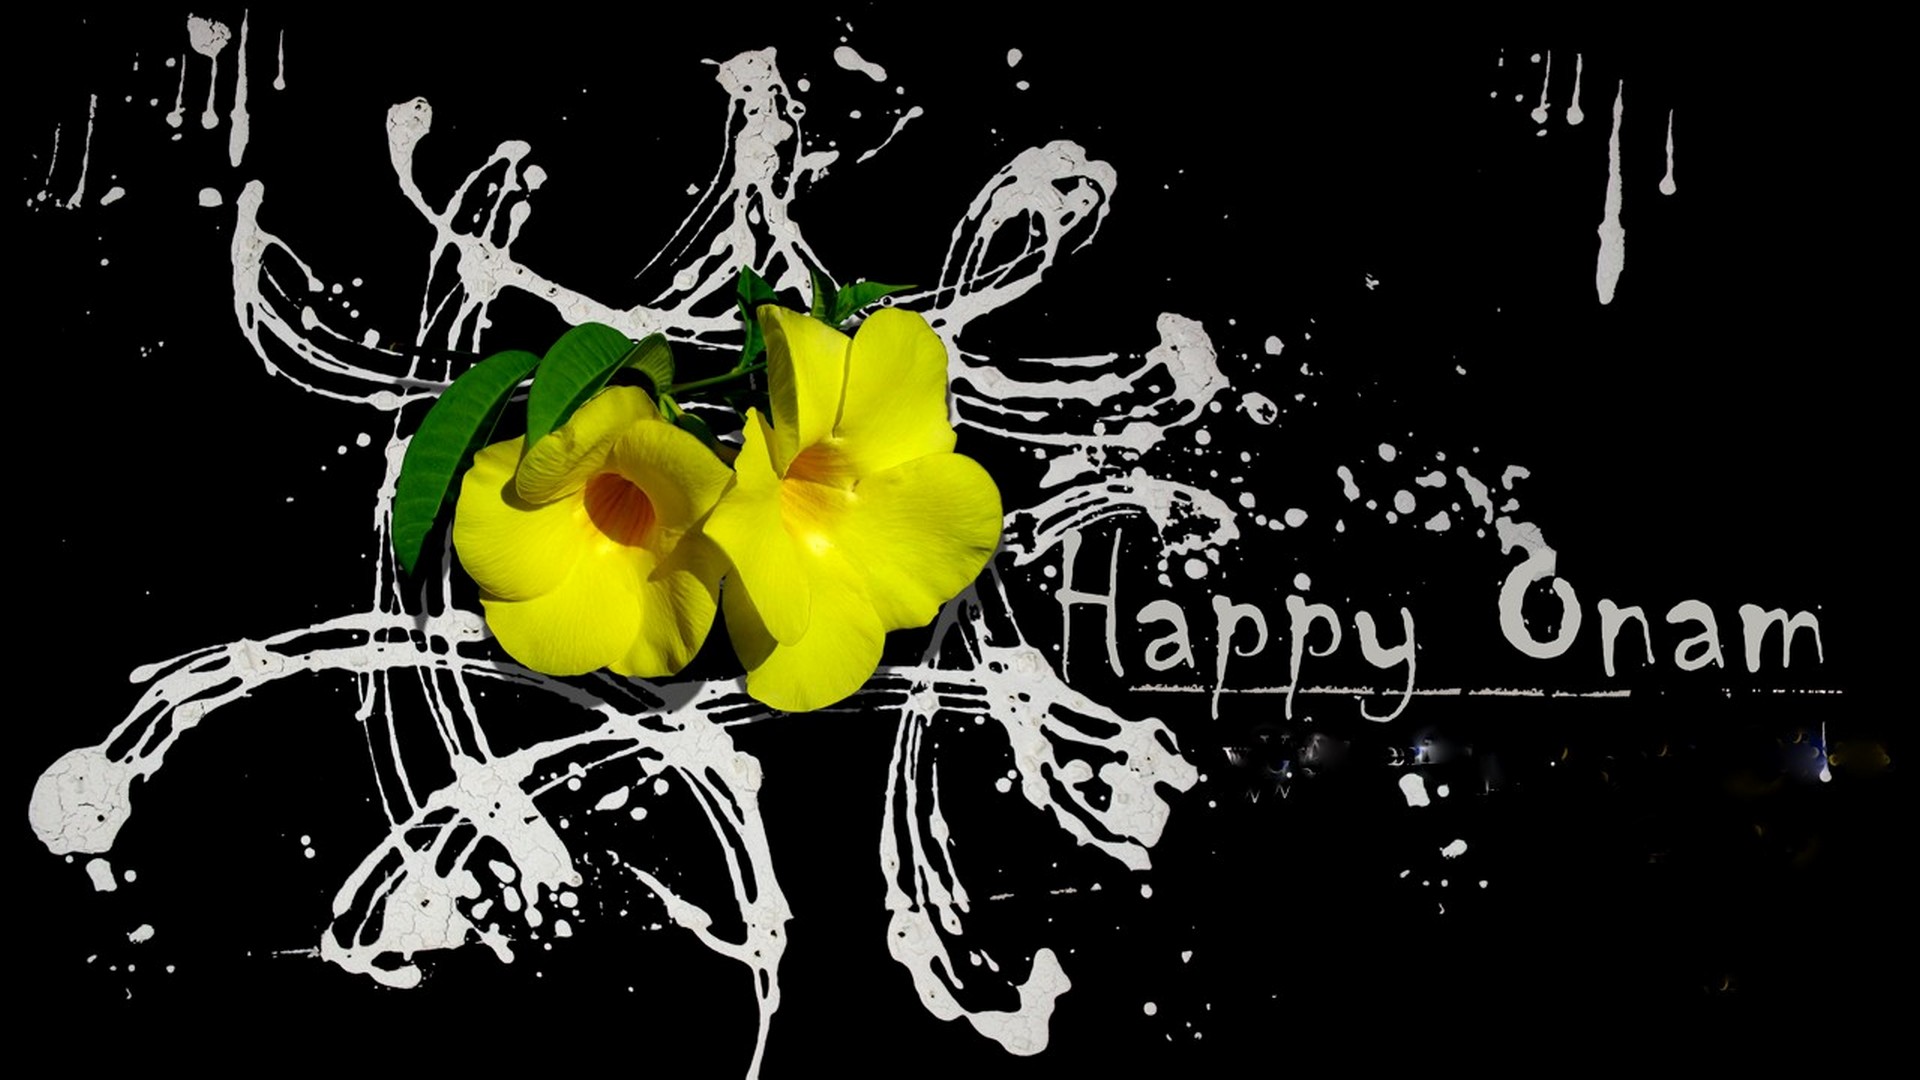 Desktop Wallpaper Black and Yellow with image resolution 1920x1080 pixel. You can use this wallpaper as background for your desktop Computer Screensavers, Android or iPhone smartphones